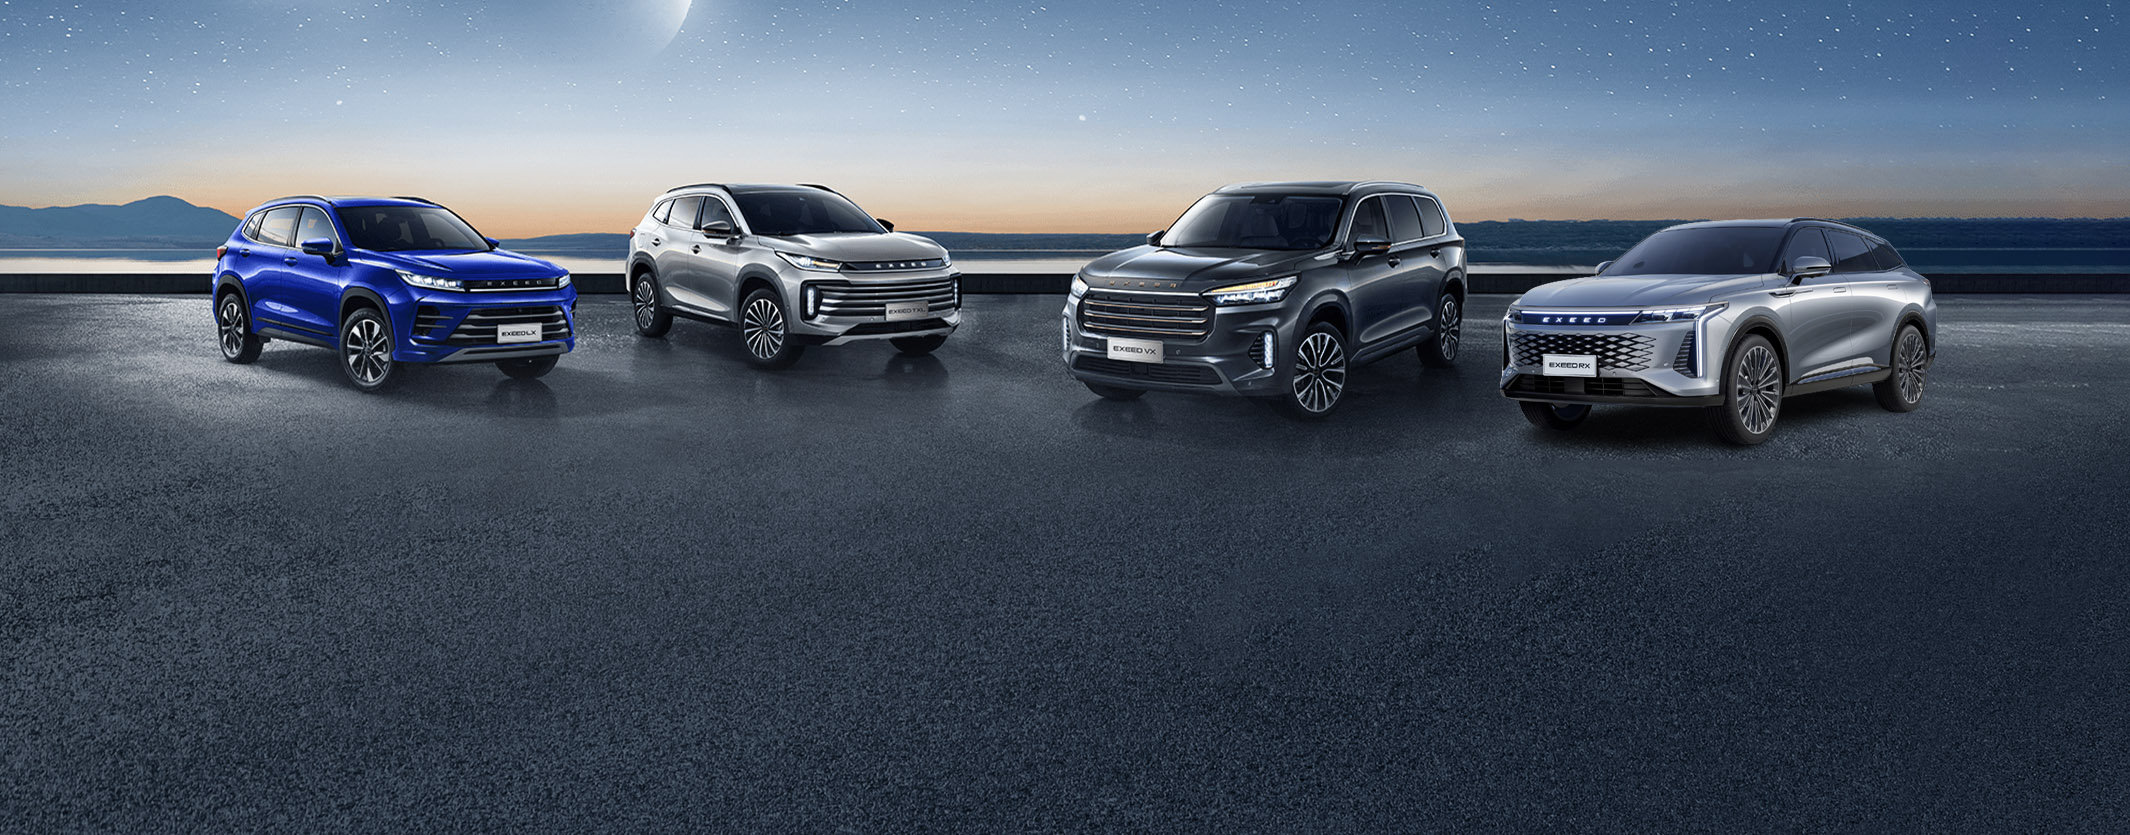 Meet Exeed — A Chinese Car Manufacturer With Premium Cars & Big Plans For The UAE Car Market